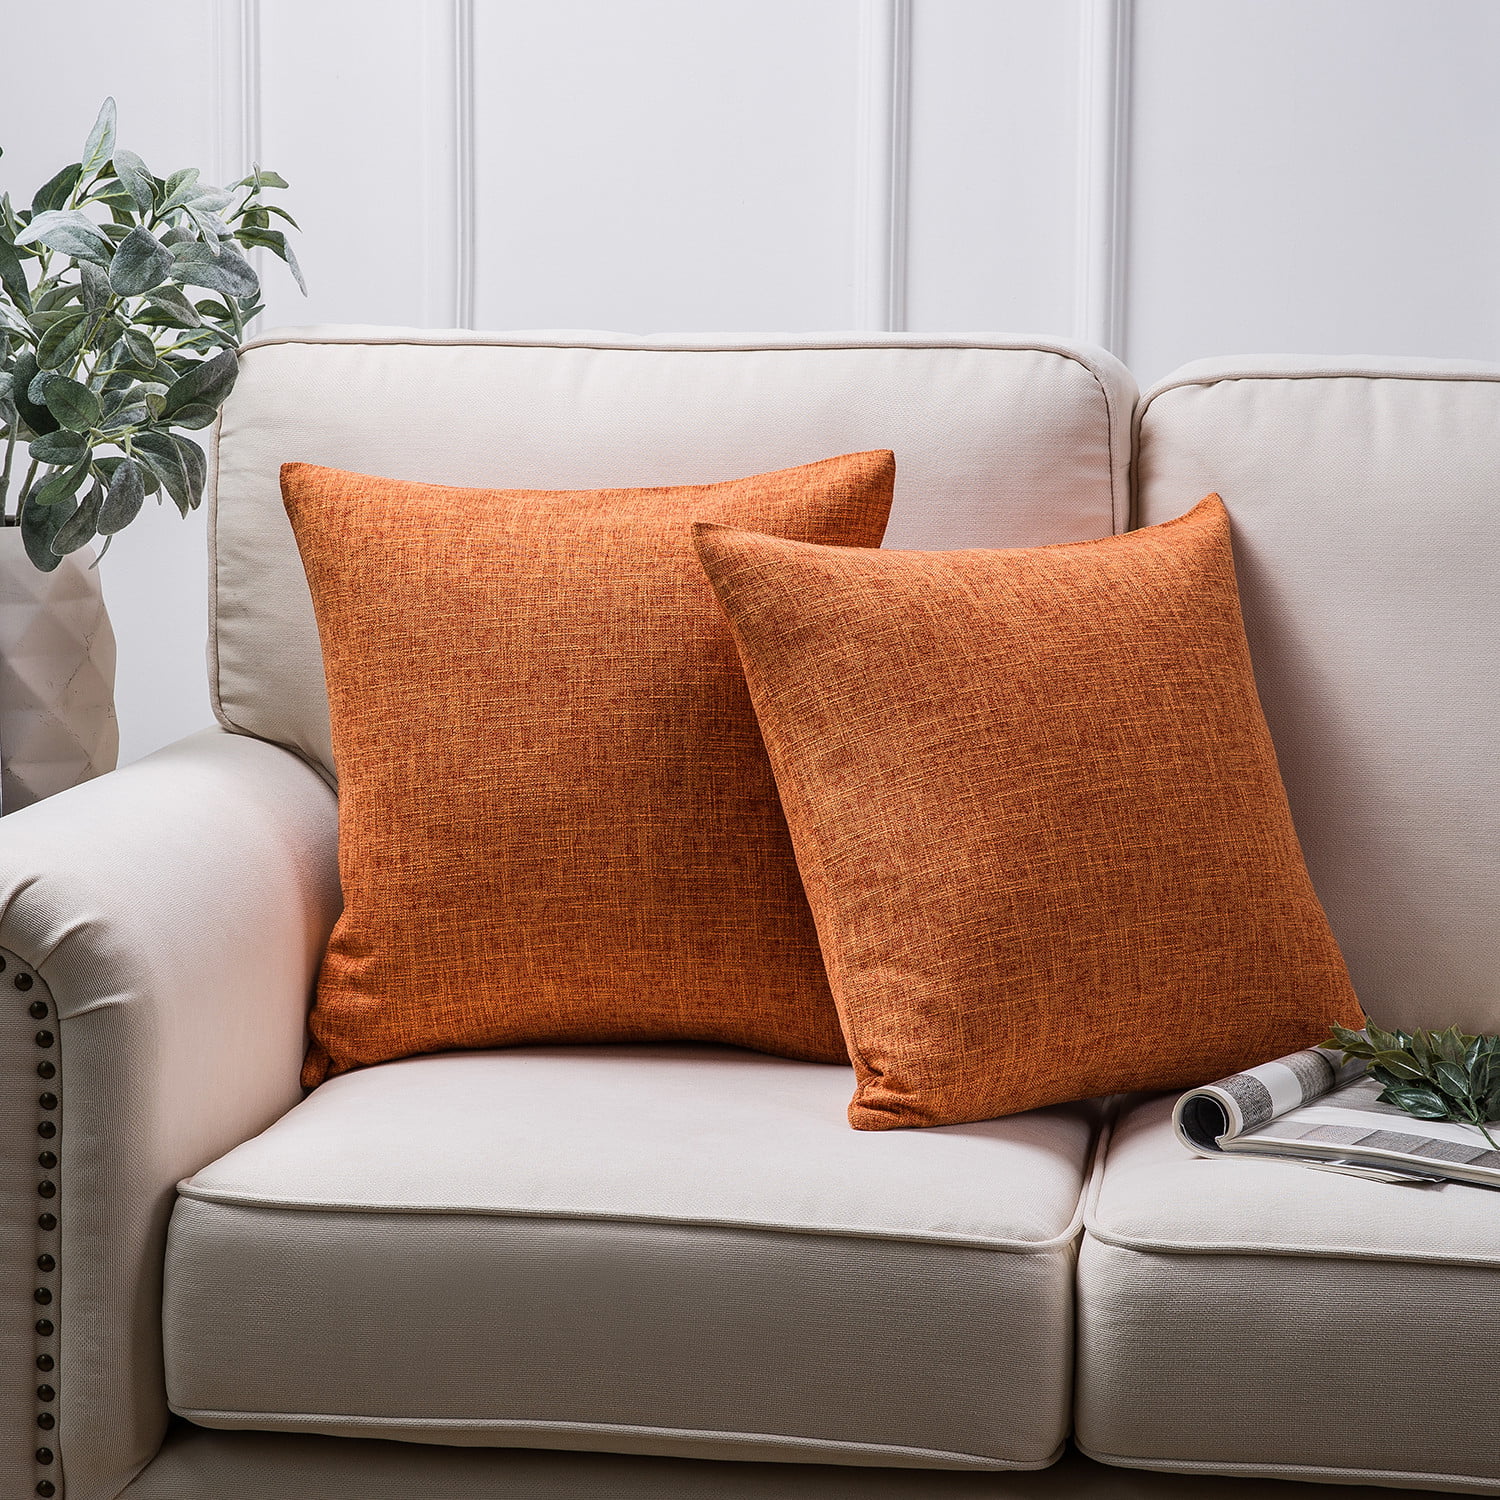 orange couch pillows